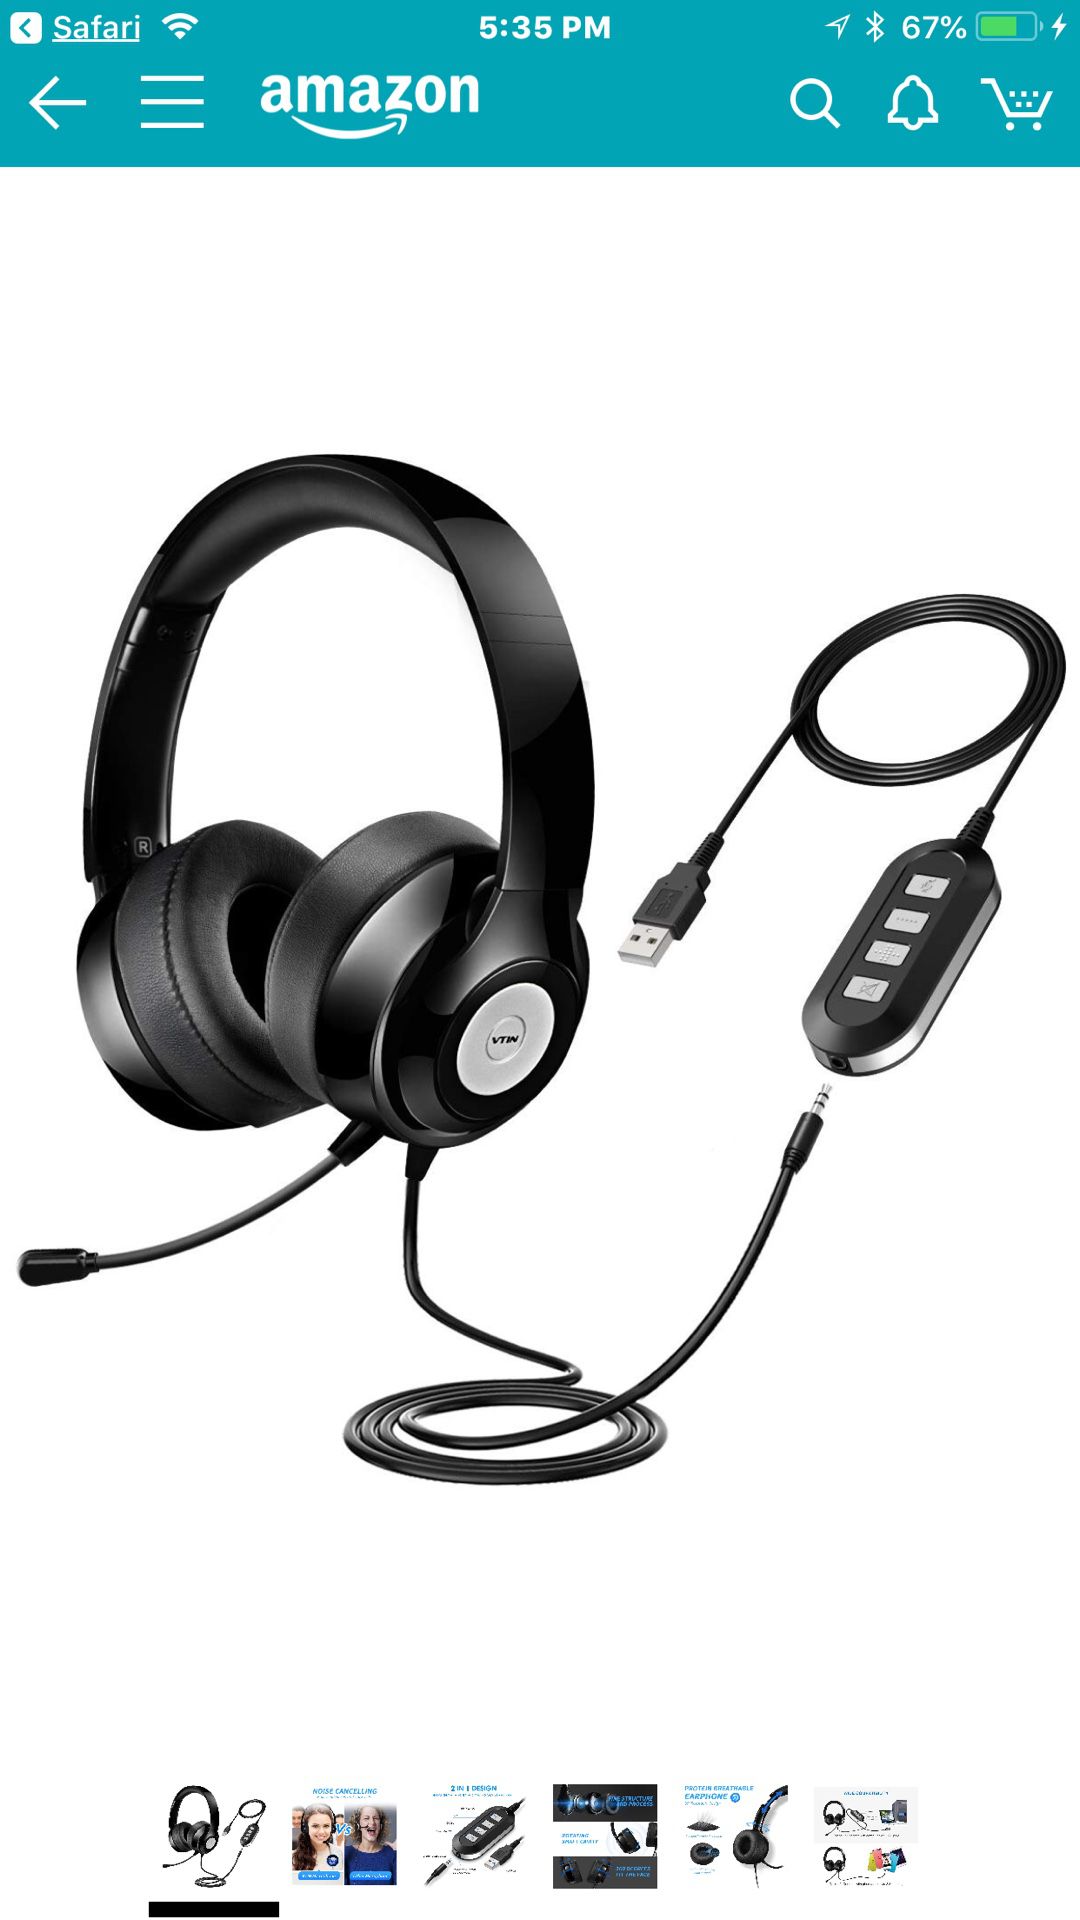 Vtin Headset with Microphone, USB Headset/3.5mm Computer Headphone Headset Noise Cancelling and Hands-Free with Mic, Stereo On-Ear Wired Business Hea